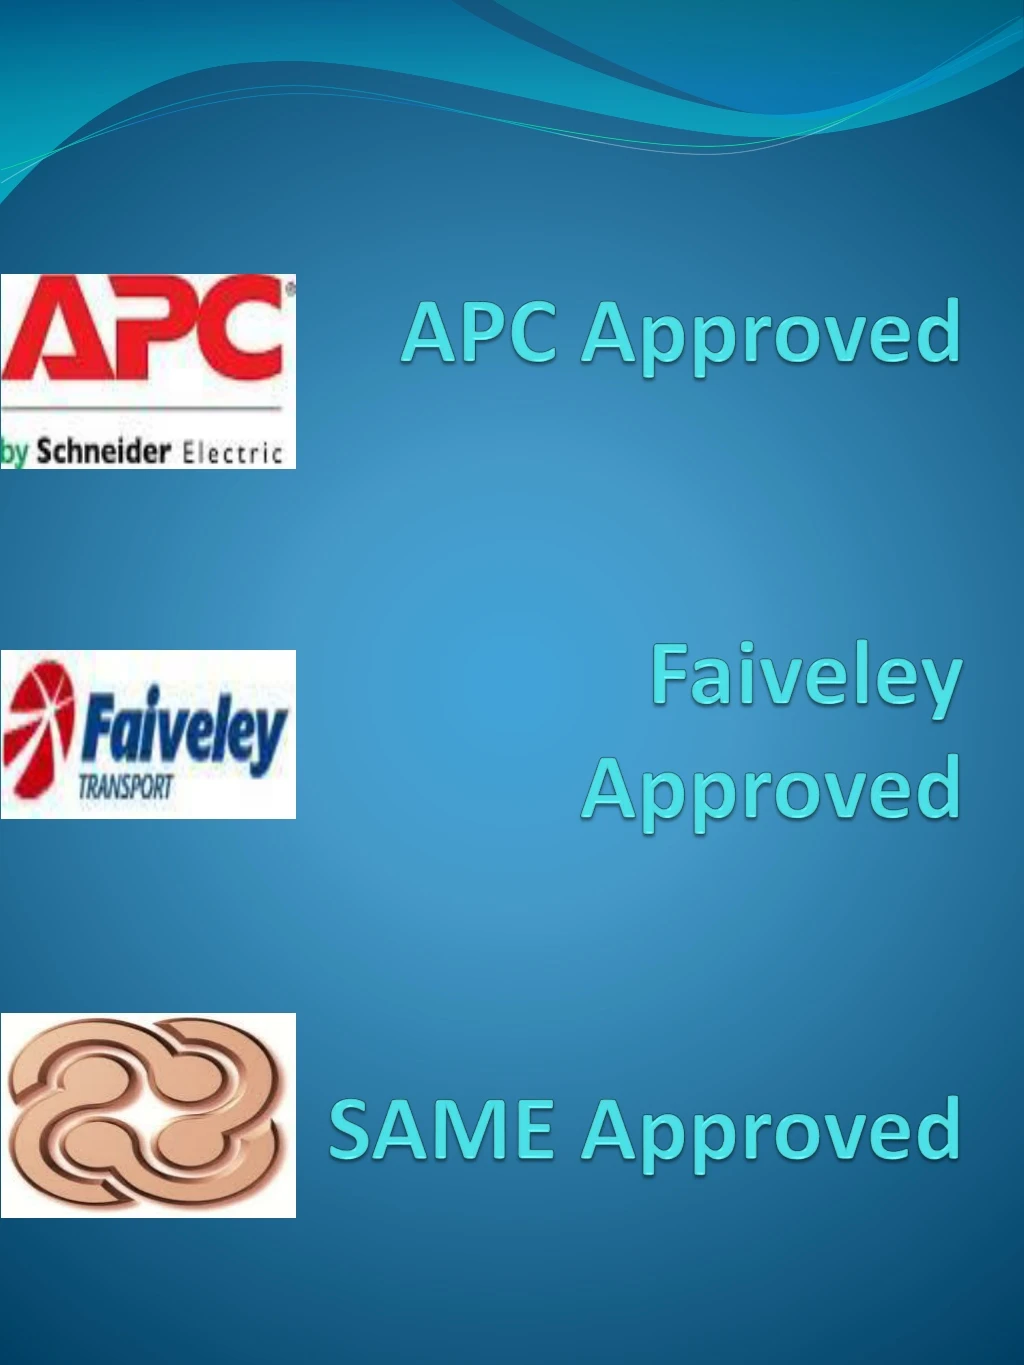 apc approved f aiveley approved same approved